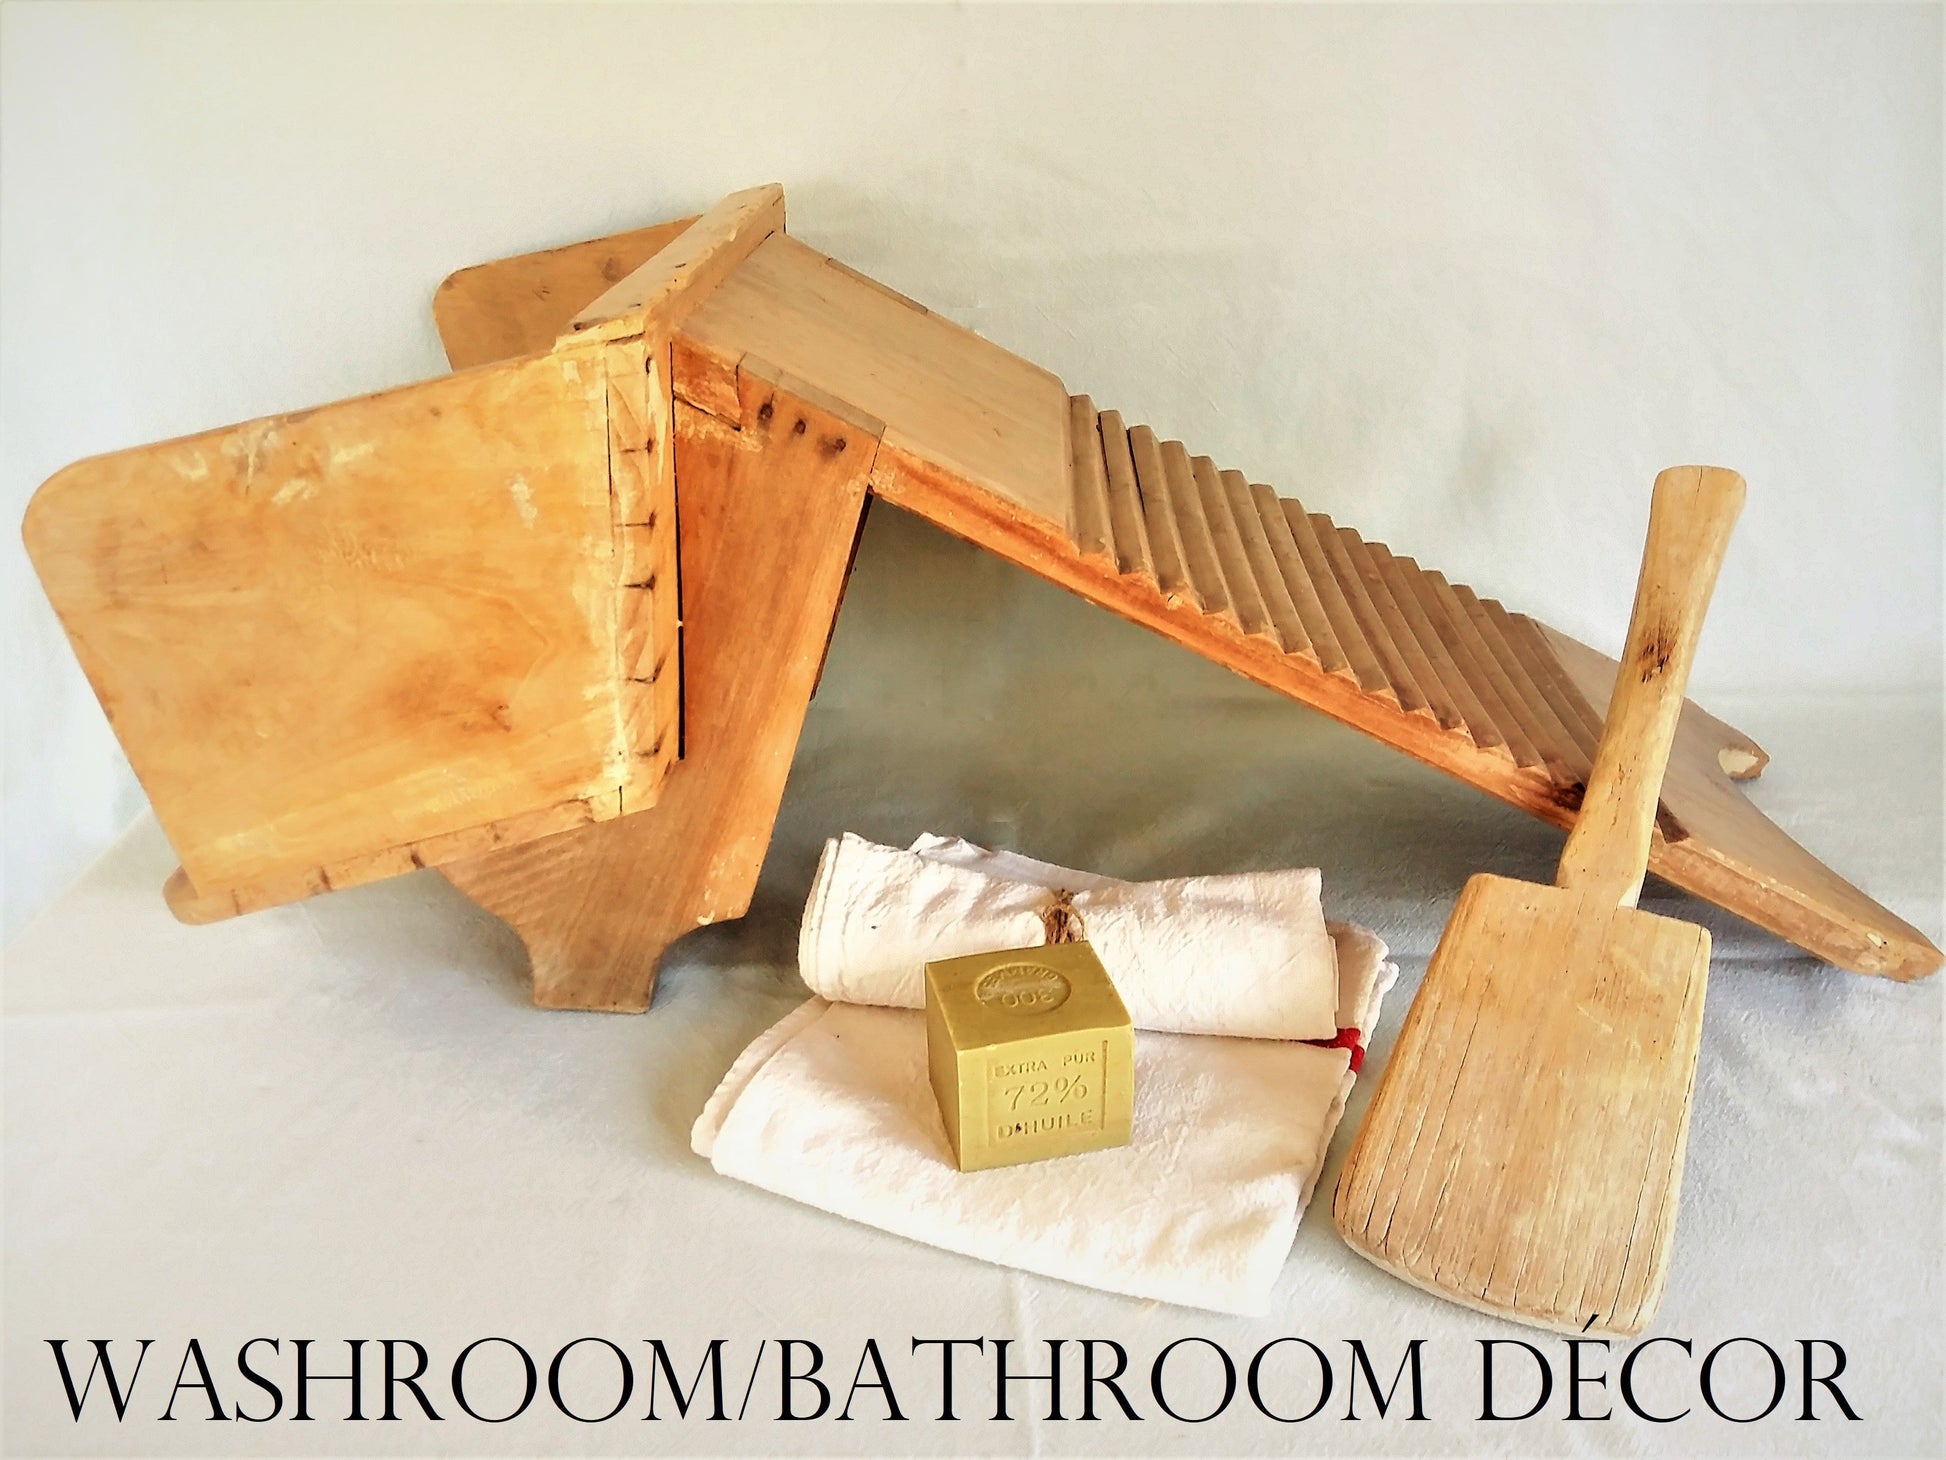 Antique Washboard and Paddle from Tiggy & Pip - €380.00! Shop now at Tiggy and Pip